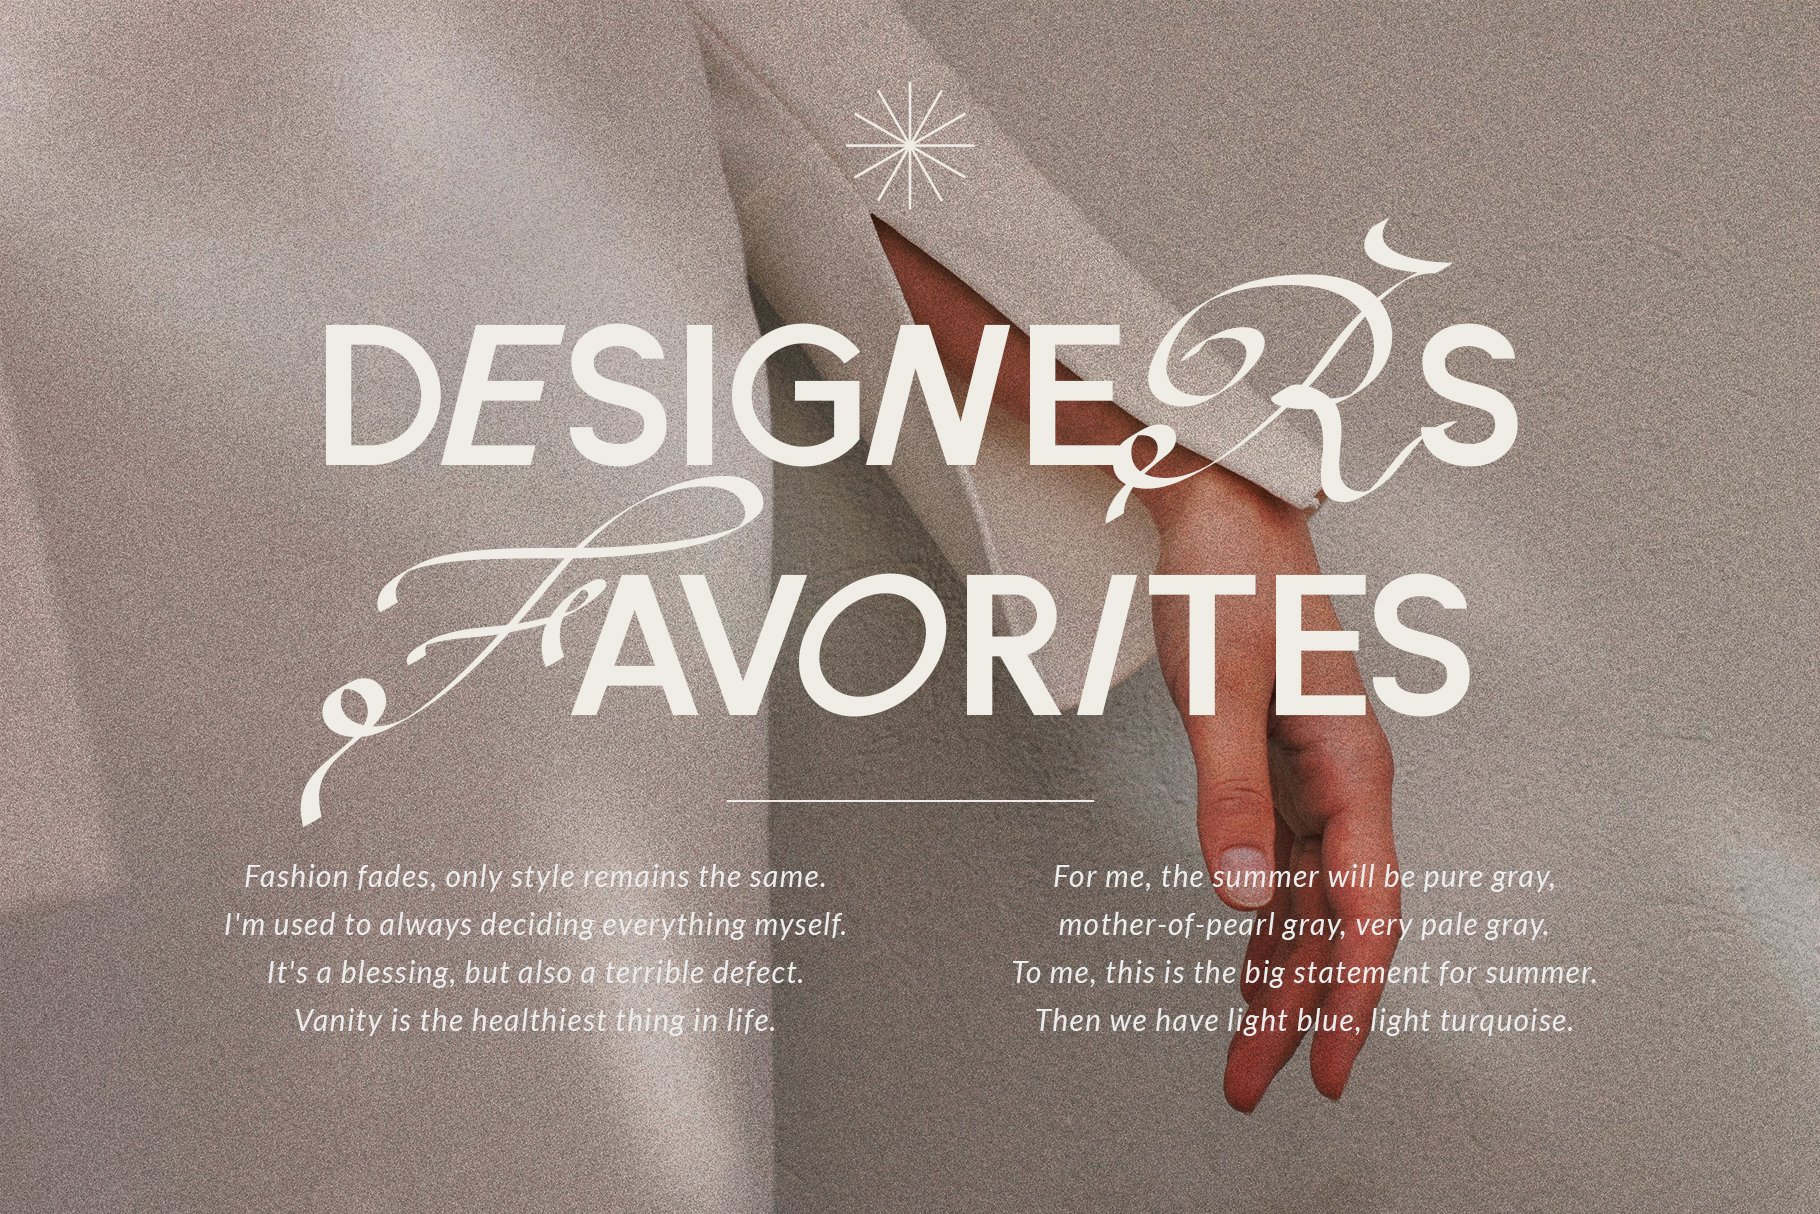 Minimalistic font style for elegant projects.